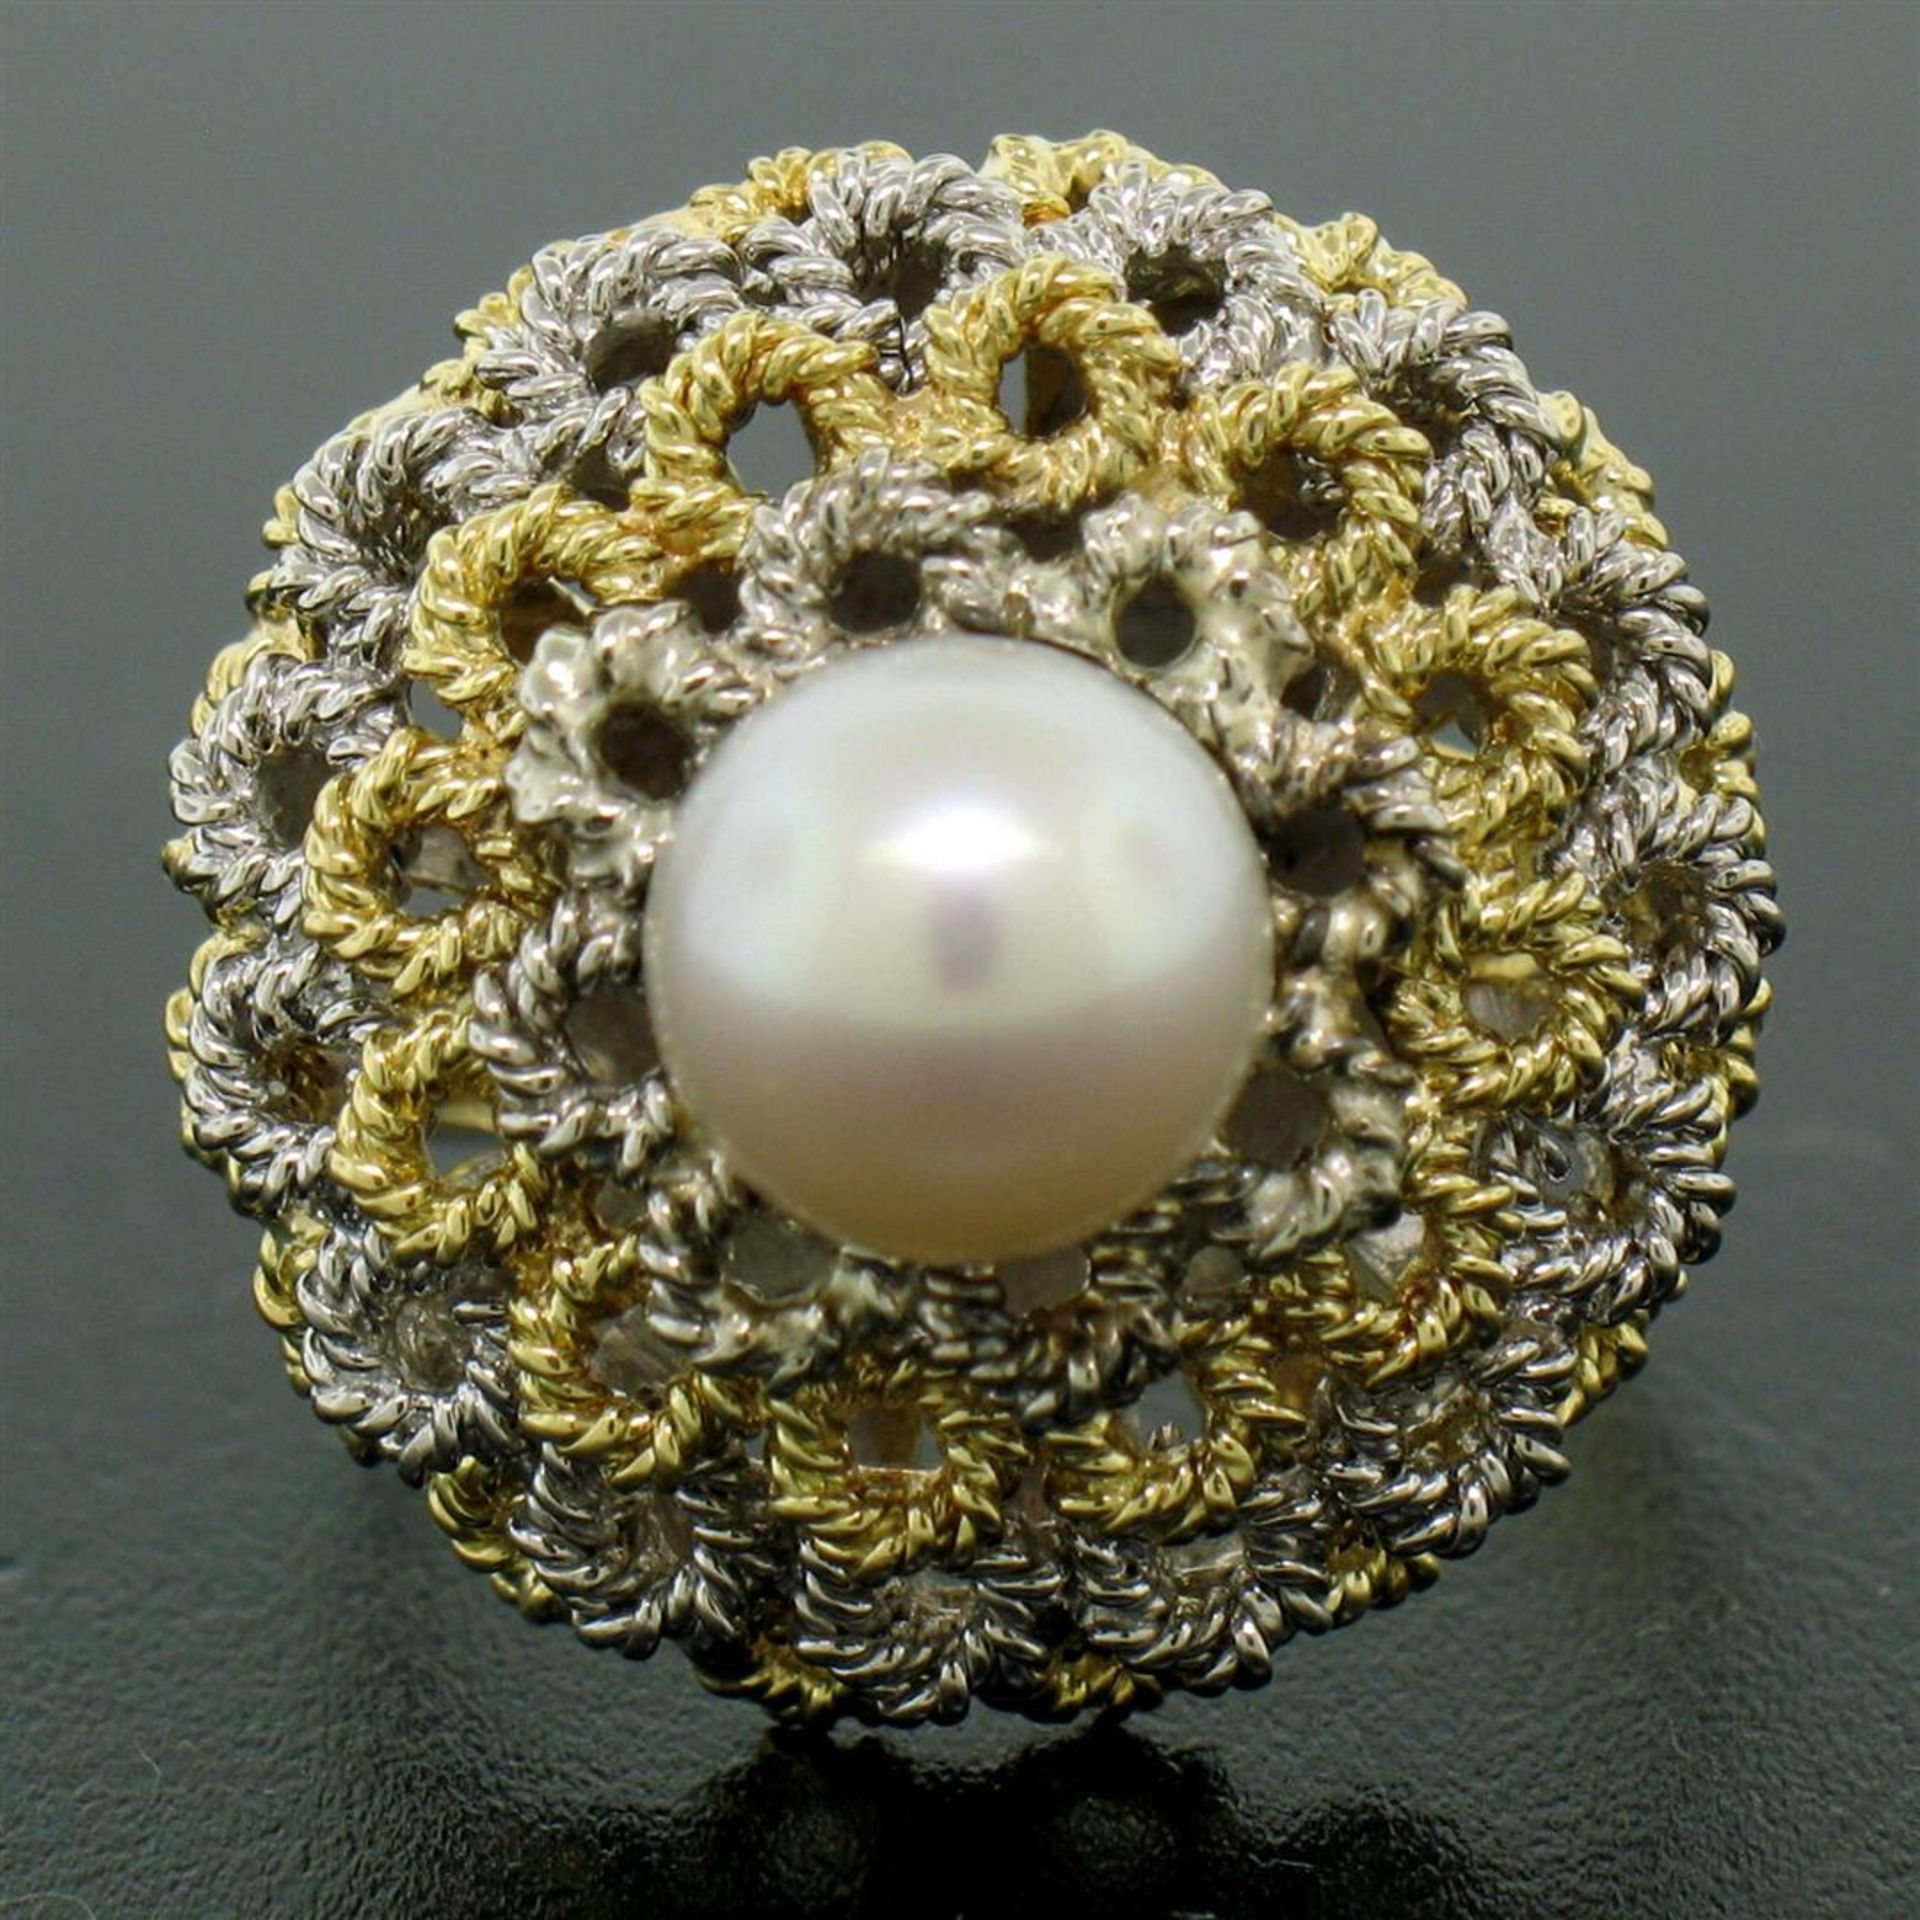 Handmade 18kt Yellow and White Gold Akoya Pearl Cocktail Ring - Image 6 of 7